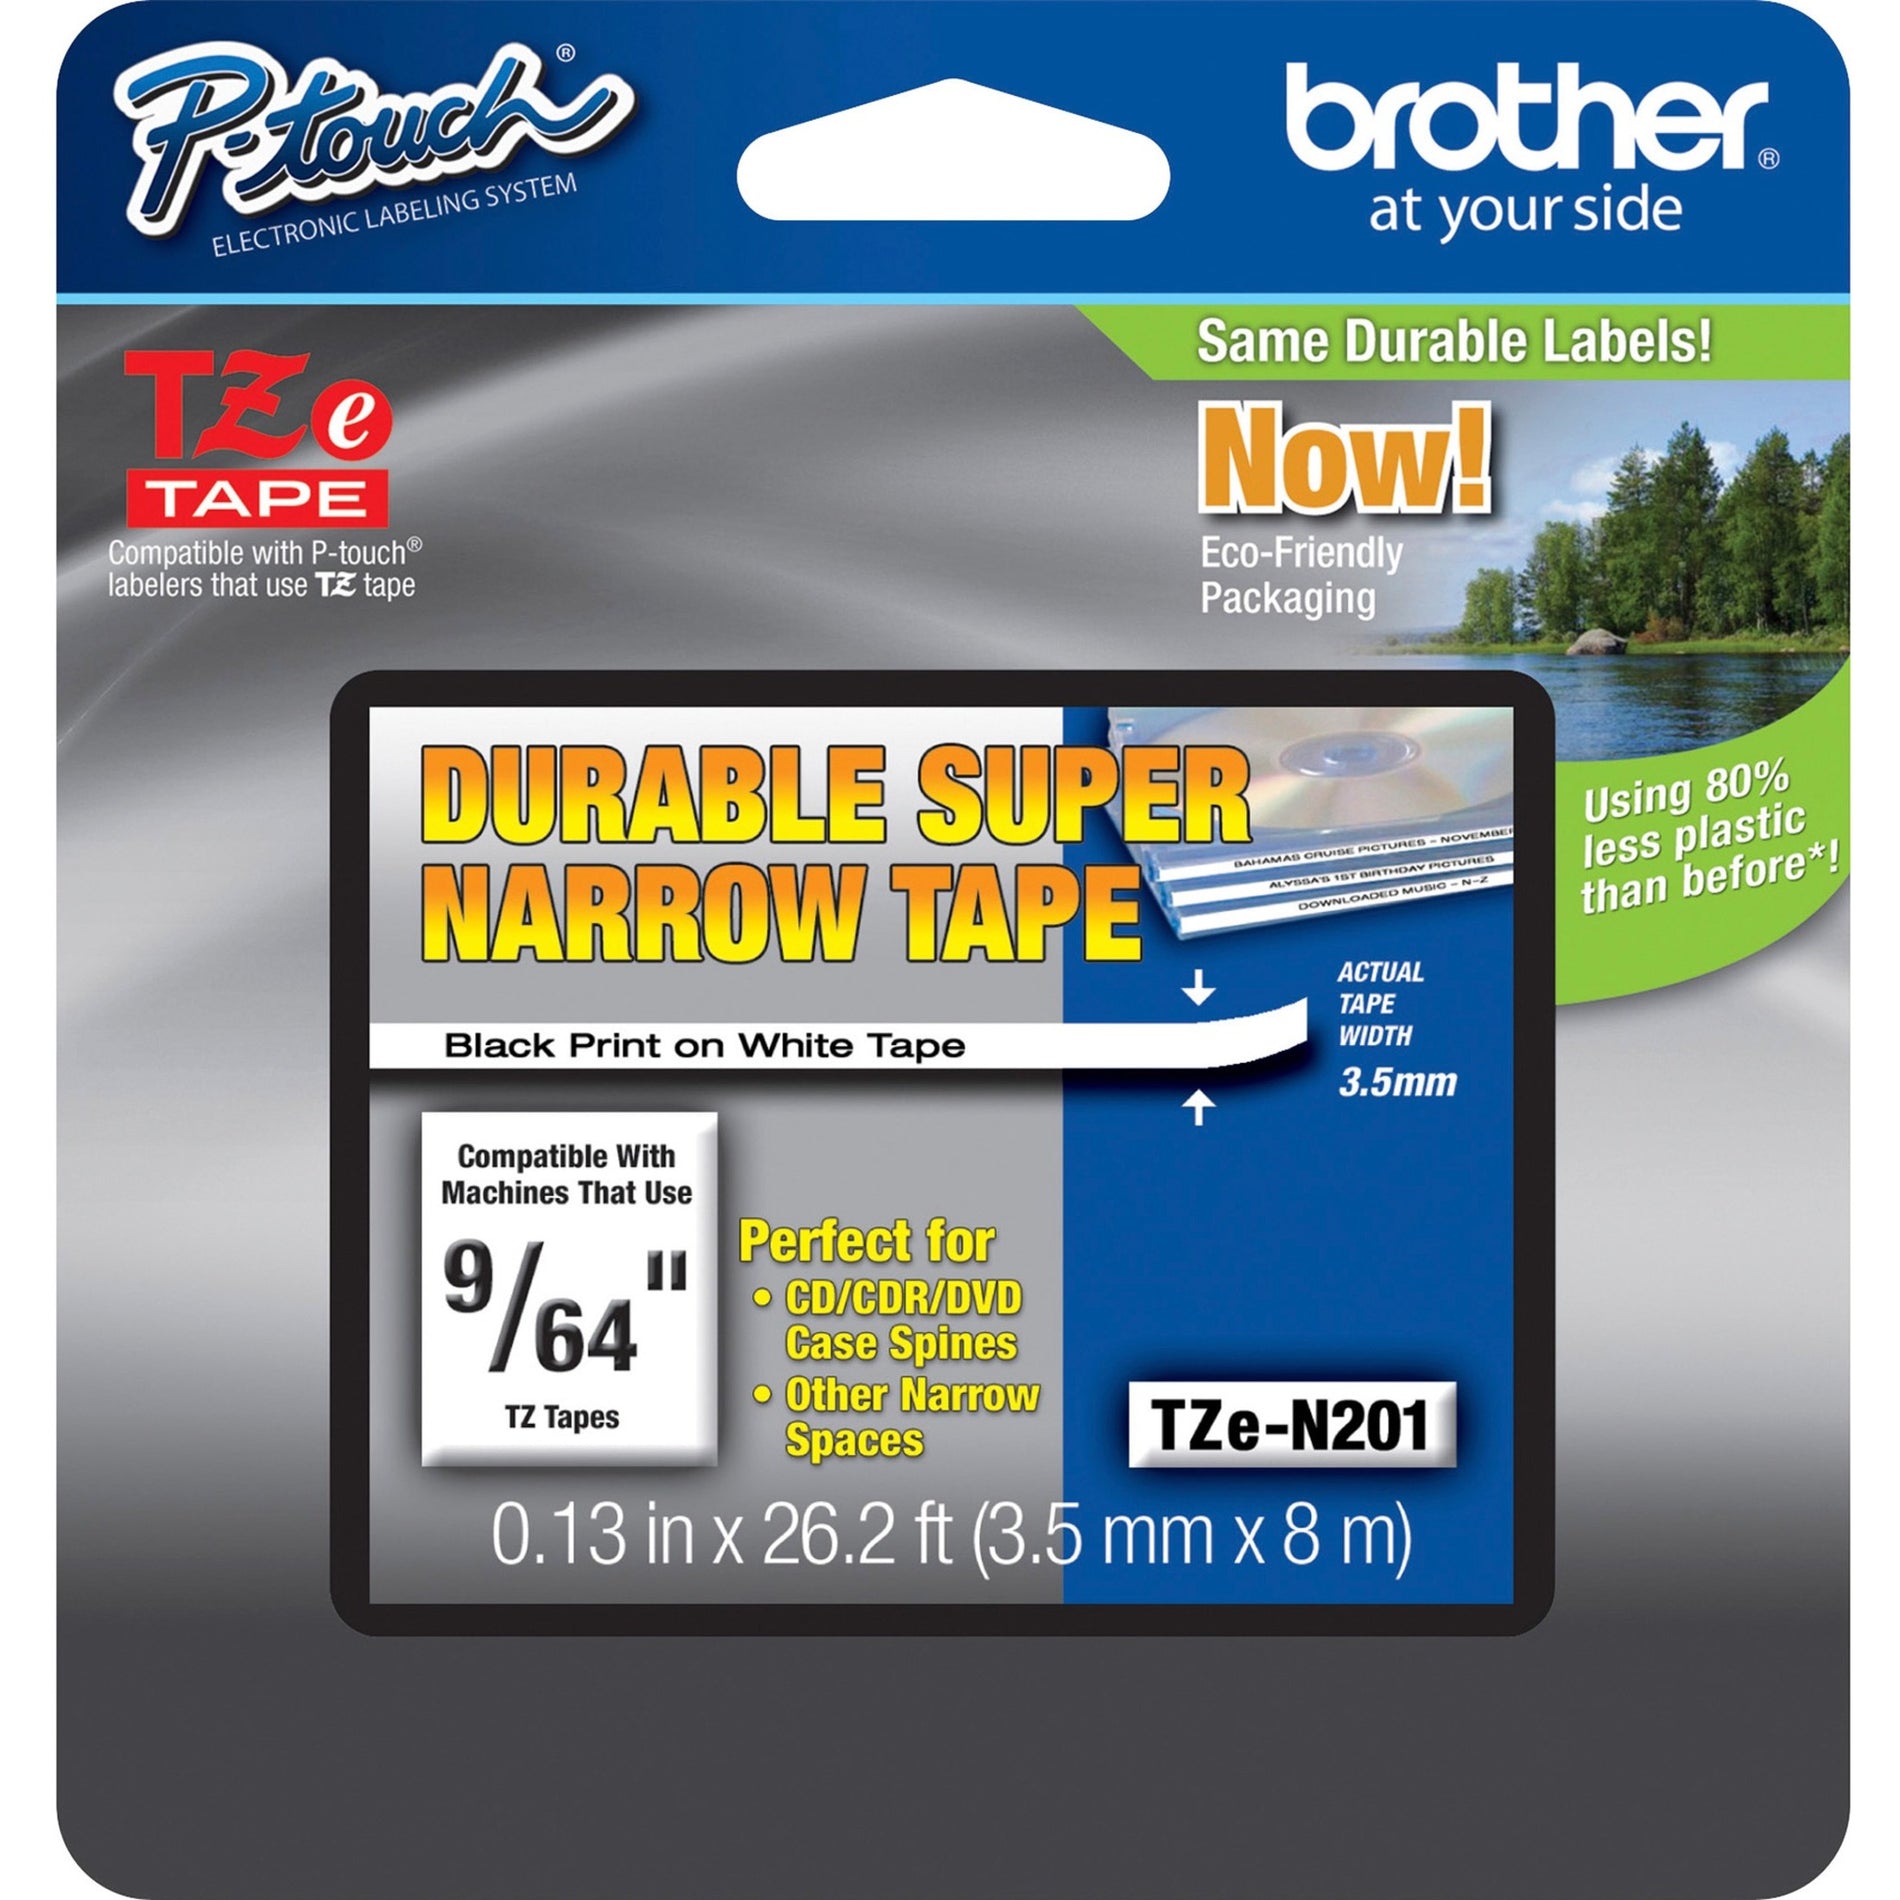 Brother TZEN201 TZ Super Narrow Non-laminated Tapes, 1/8" Black/White, Abrasion Resistant, Fade Resistant, High Durable, Chemical Resistant, Temperature Resistant